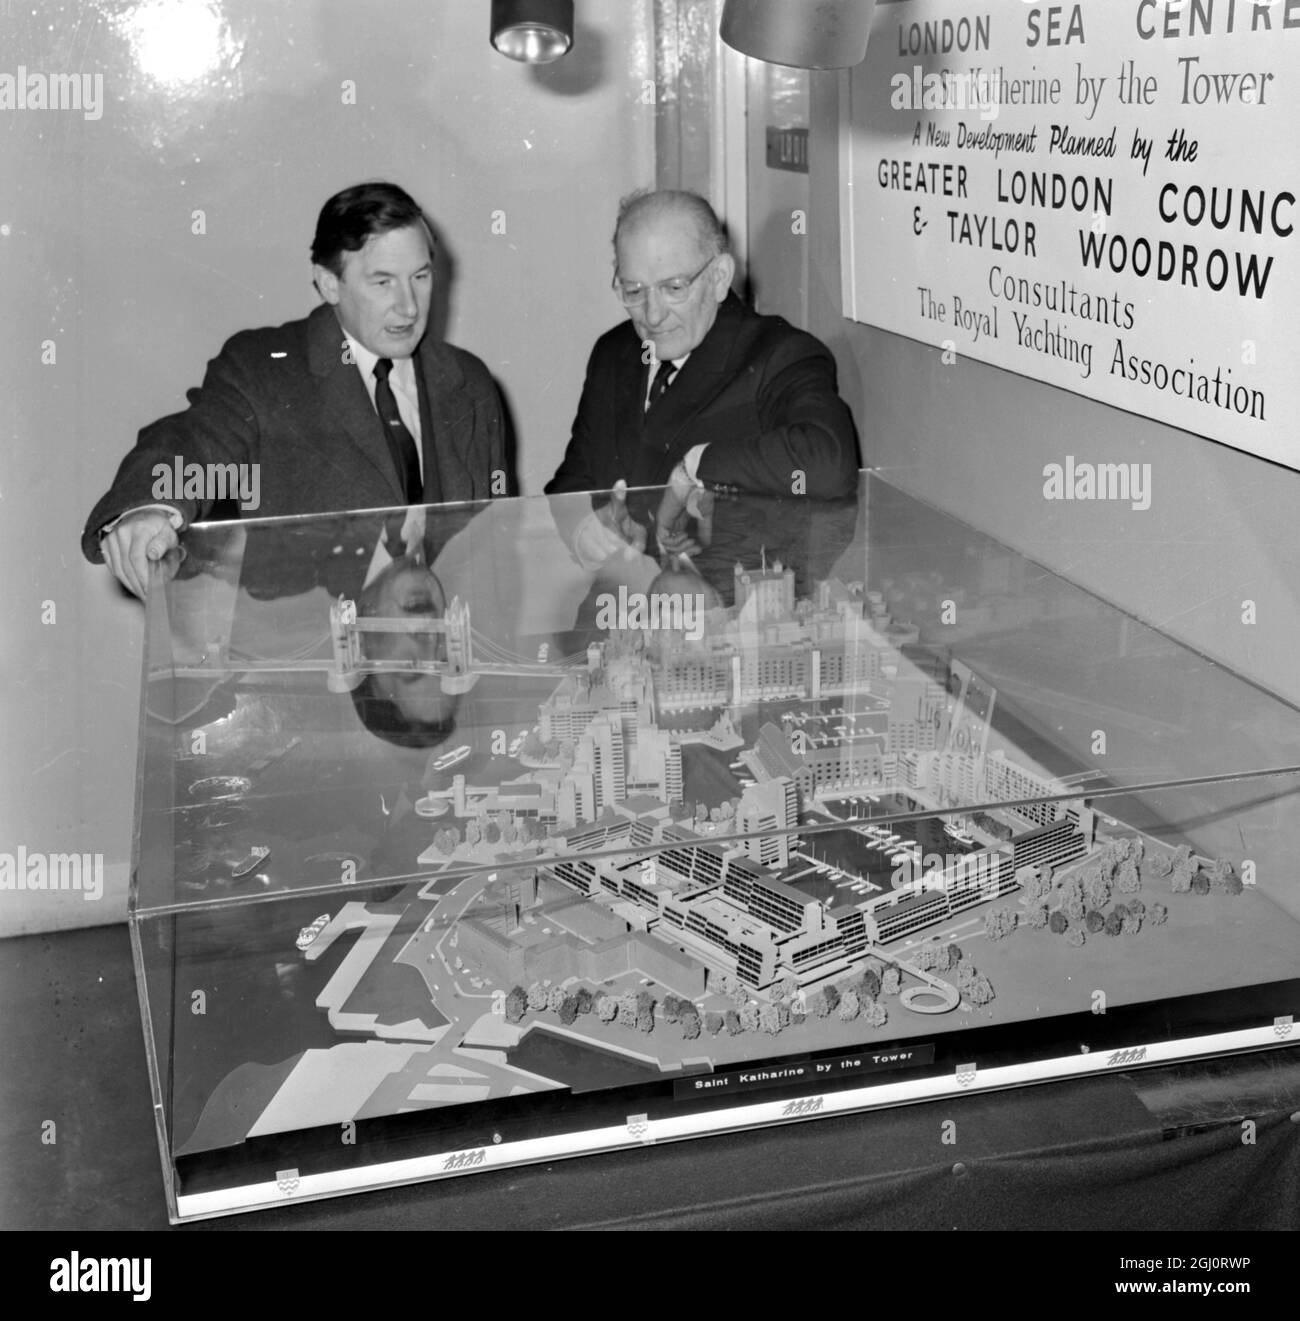 London: Sir Francis Chichester (right), Britain's epic lone round-the-world yachtman, view a model of the St Katharine Docks development scheme, planned by the Greater London Council, when he visited the international Boat Show at Earls Court, London today. Site for the scheme is next to London's Historic Tower of London. The proposed scheme will incorporate London's only yacht basin, capable of berthing some 250 craft. 8 January1970 Stock Photo